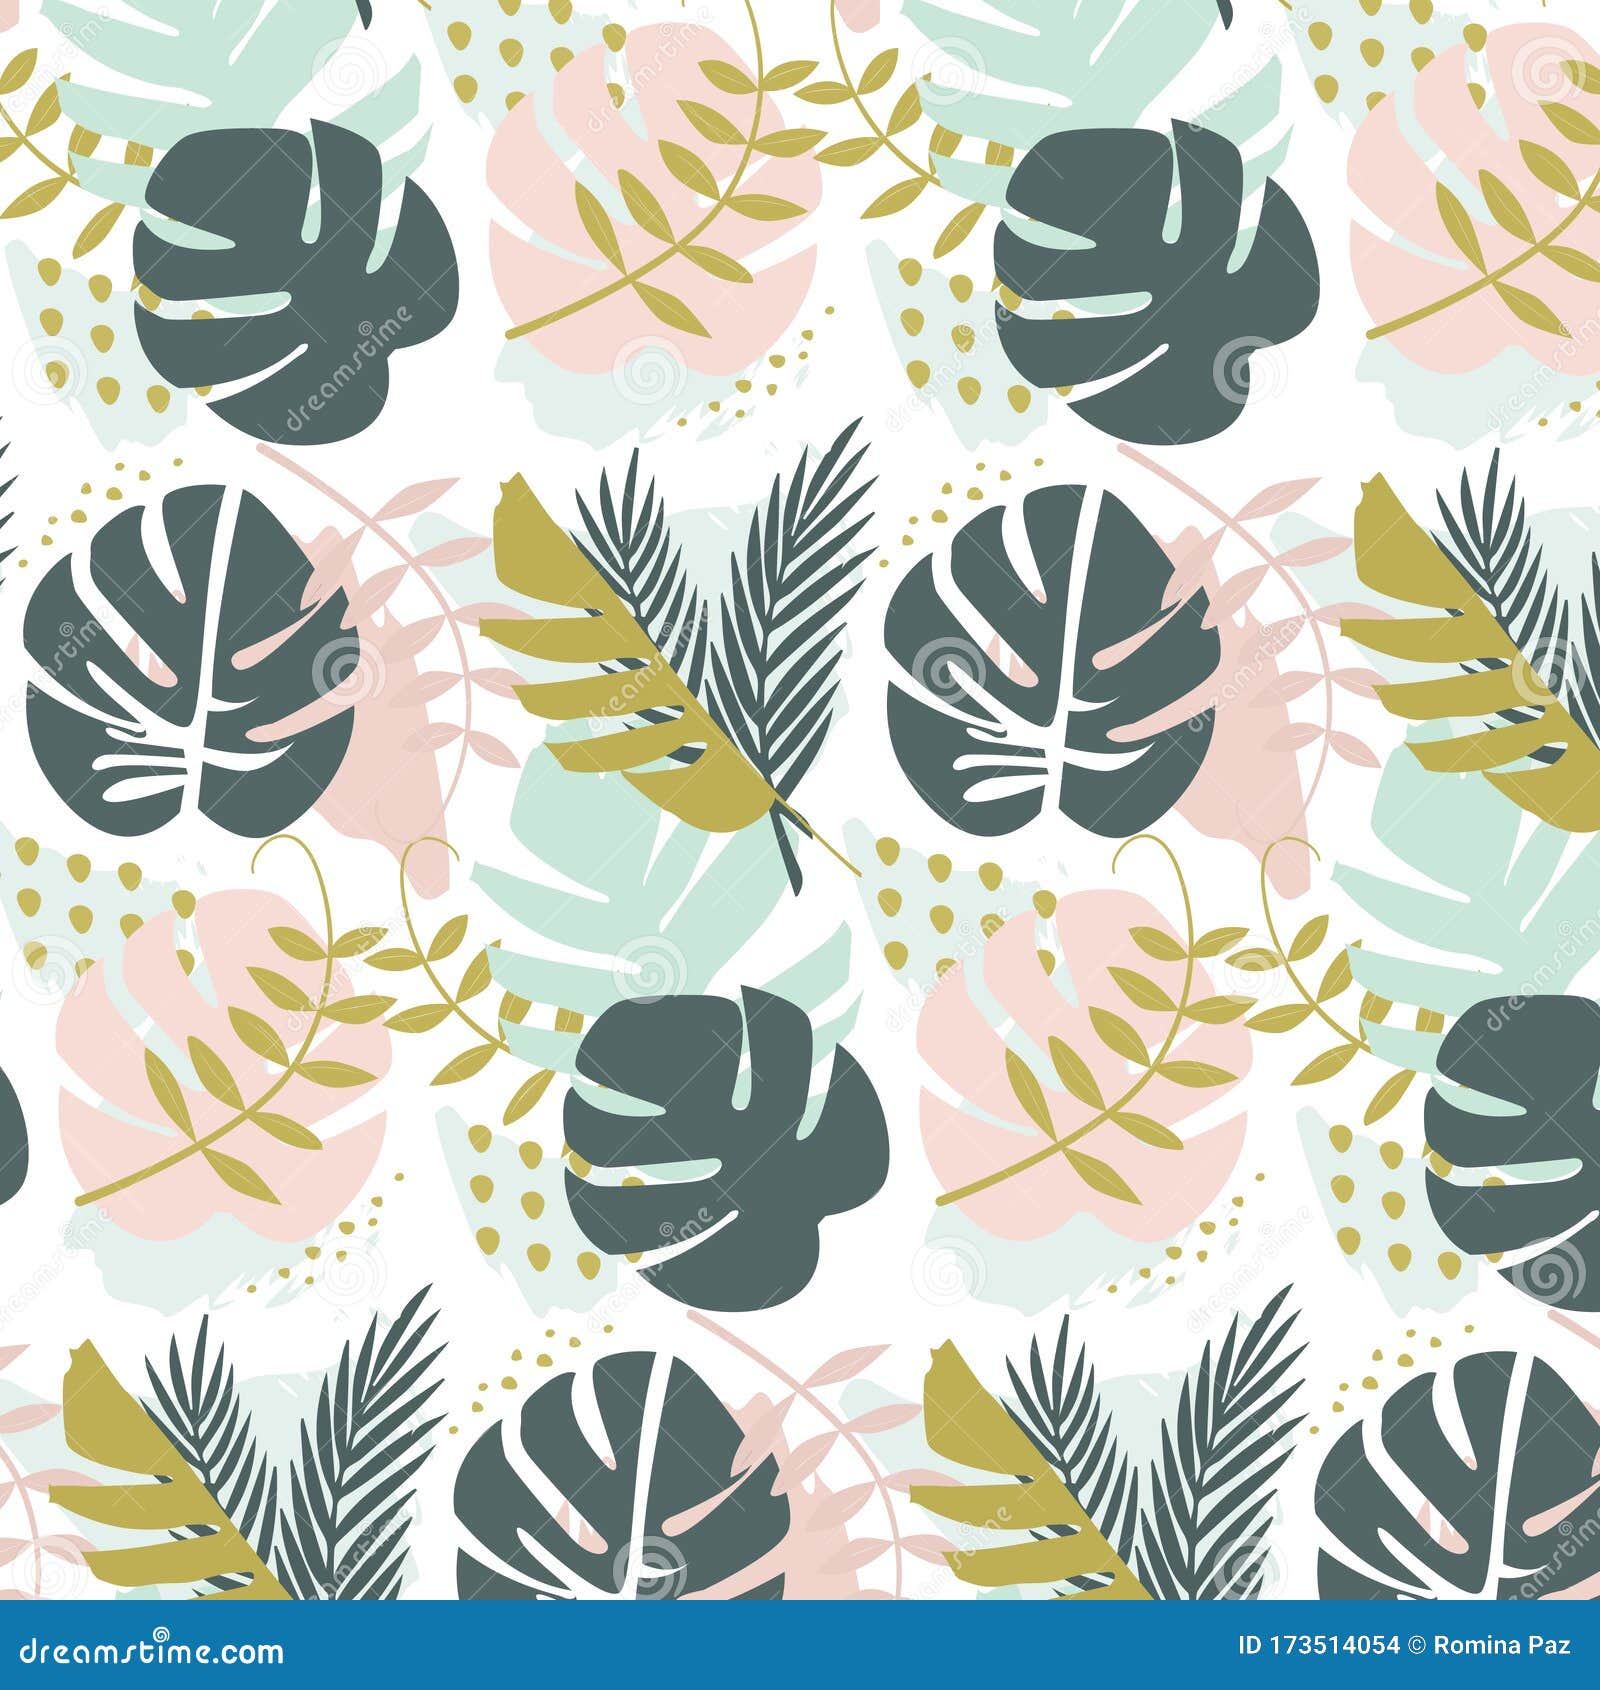 repetition of tropical leaves as a background for notebooks, napkins, decorative boxes and wrapping paper